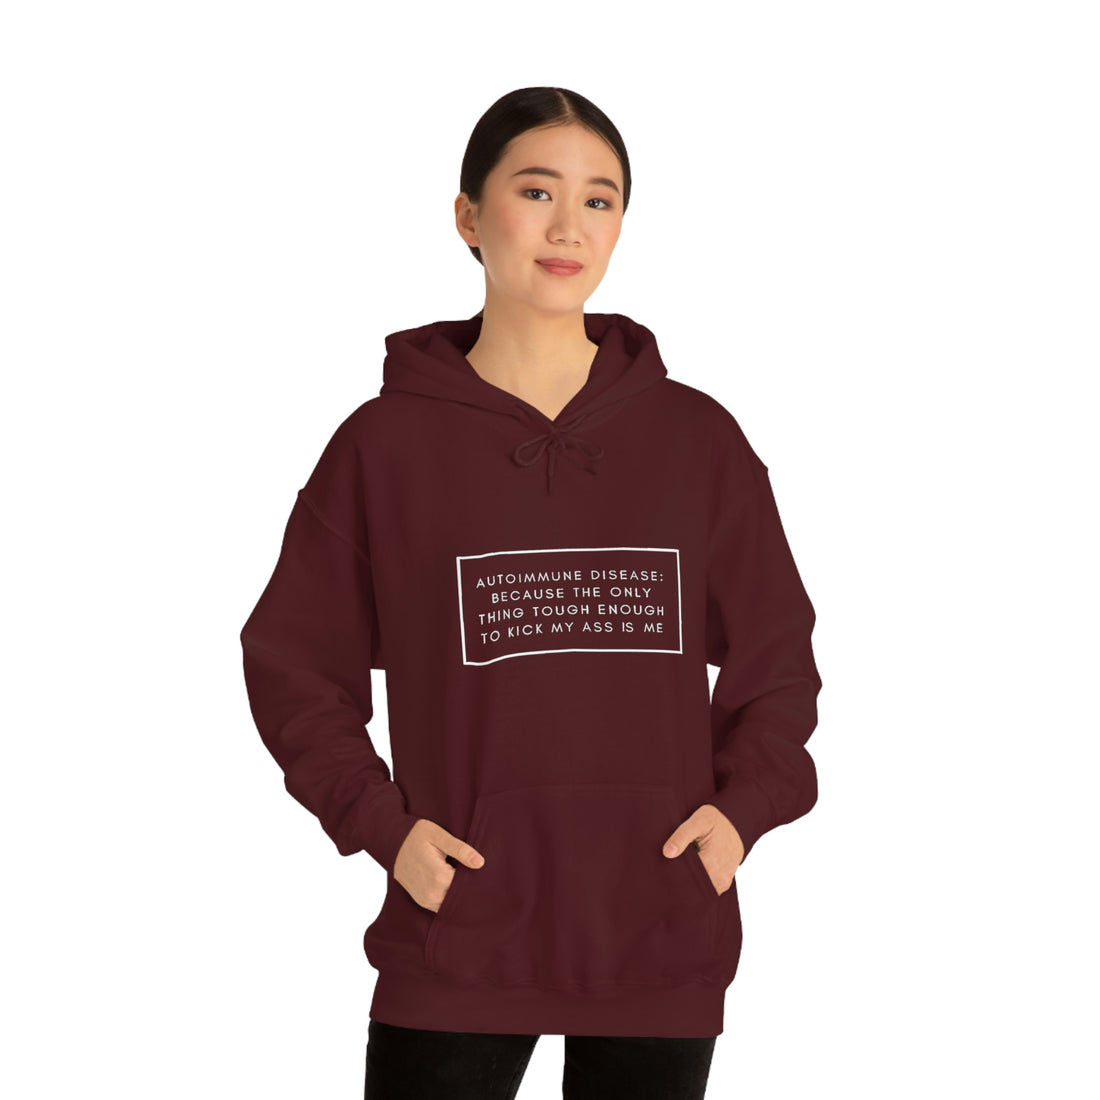 Autoimmune Disease Because The Only Thing Tough Enough To Kick My Ass Is Me - Unisex Heavy Blend™ Hooded Sweatshirt